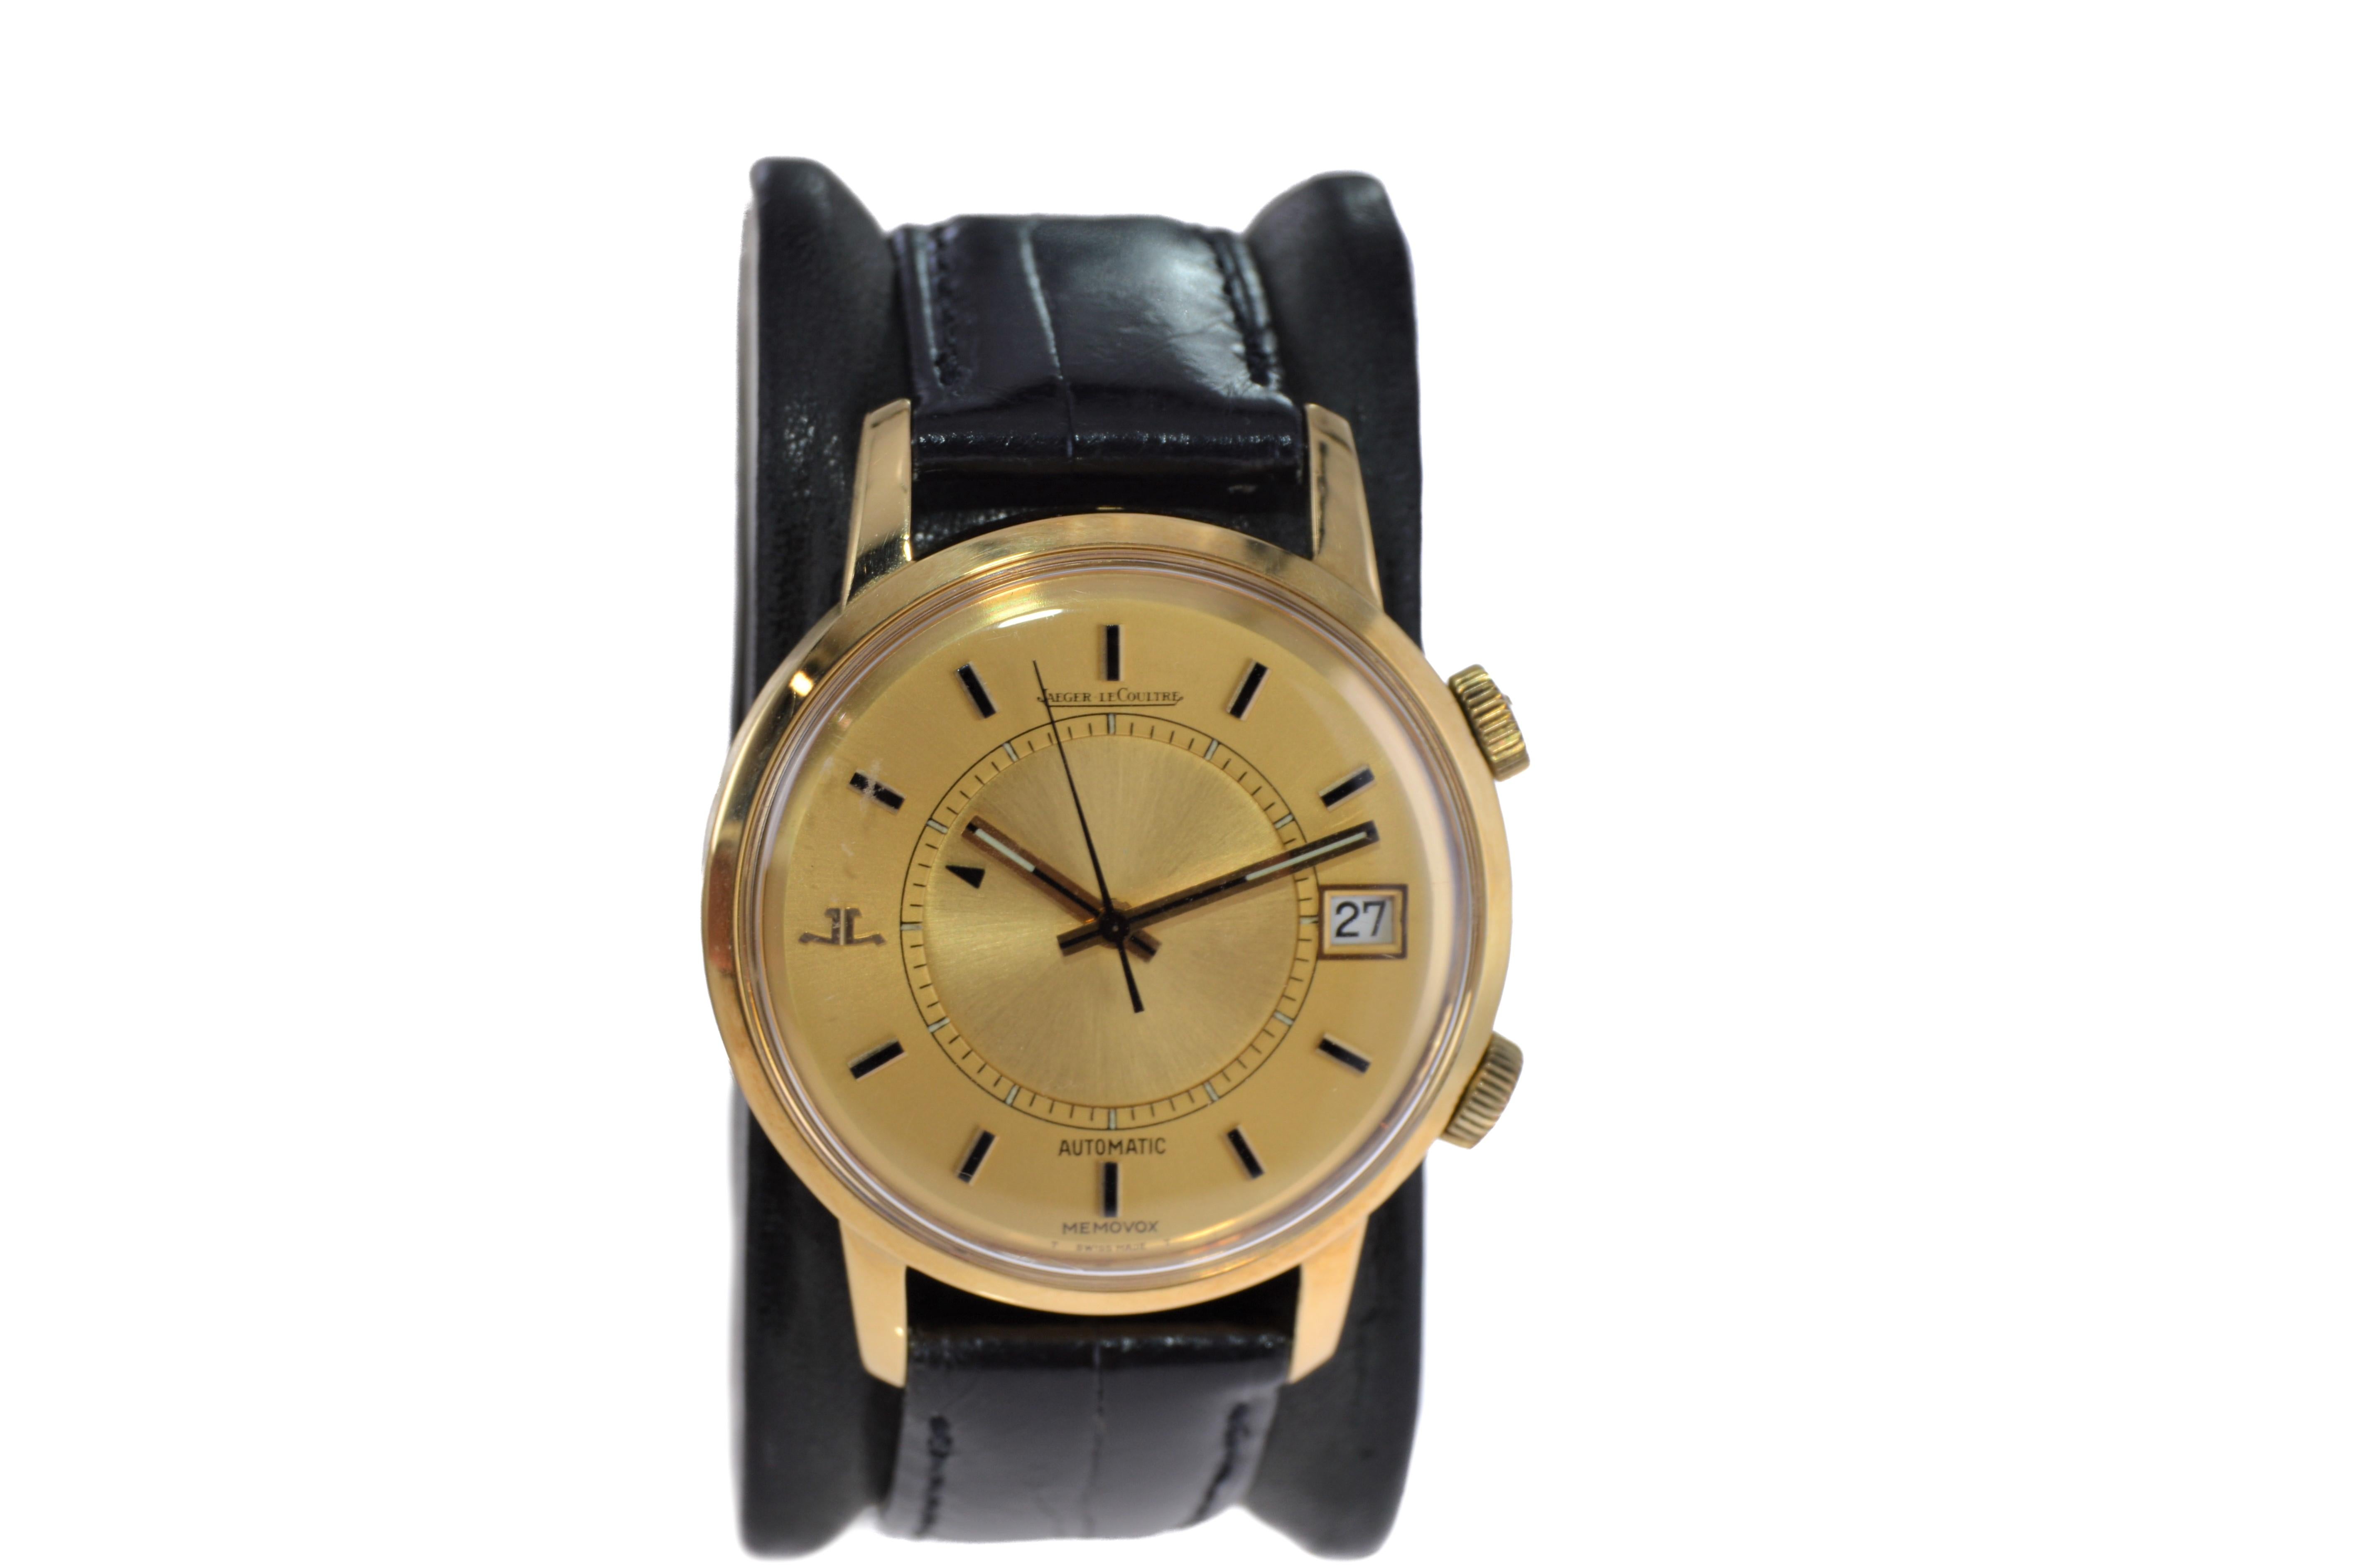 FACTORY / HOUSE: Jaeger LeCoultre
STYLE / REFERENCE: Memovox
METAL / MATERIAL: 18Kt. Yellow Gold
CIRCA / YEAR: 1960's / 1970's
DIMENSIONS / SIZE: Length 45mm X Diameter 35mm
MOVEMENT / CALIBER: Automatic Winding /17 Jewels 
DIAL / HANDS: Original